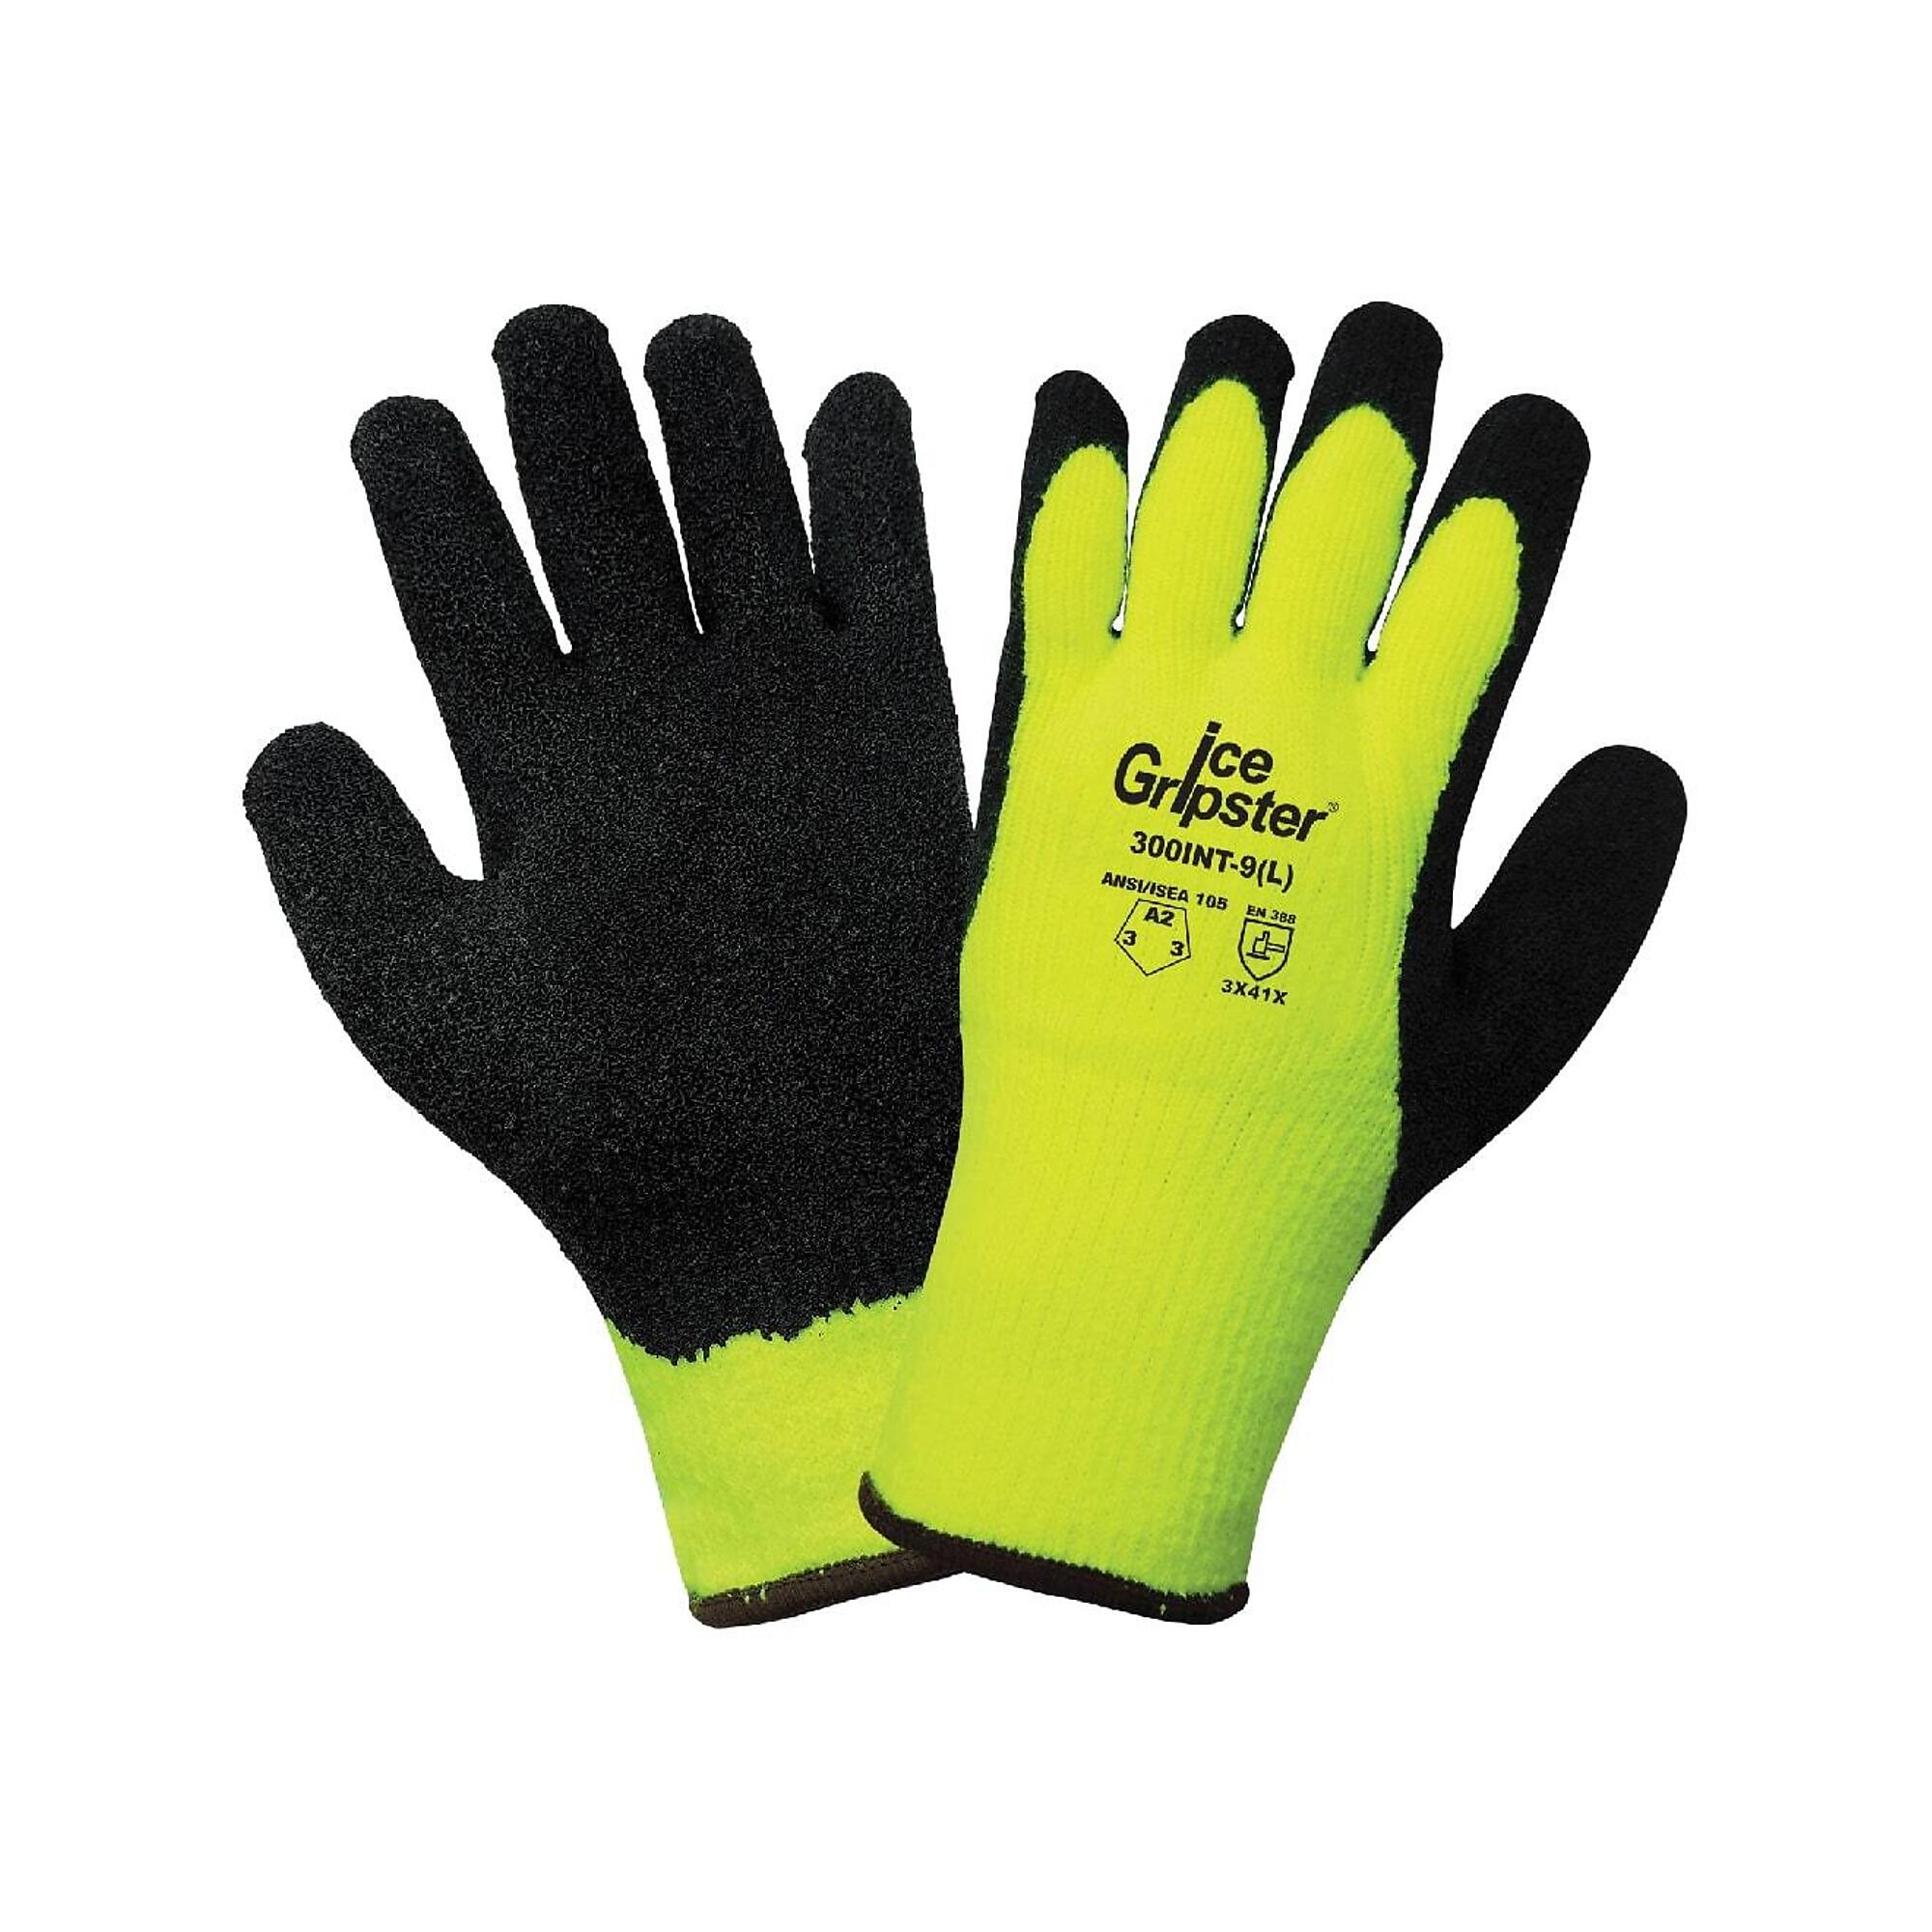 Global Glove Ice Gripster , HV Insulated, Wat-Resist, Rub Dip, Cut A2 Gloves - 12 Pairs, Size L, Color High-Visibility Yellow/Black, Included (qty.)